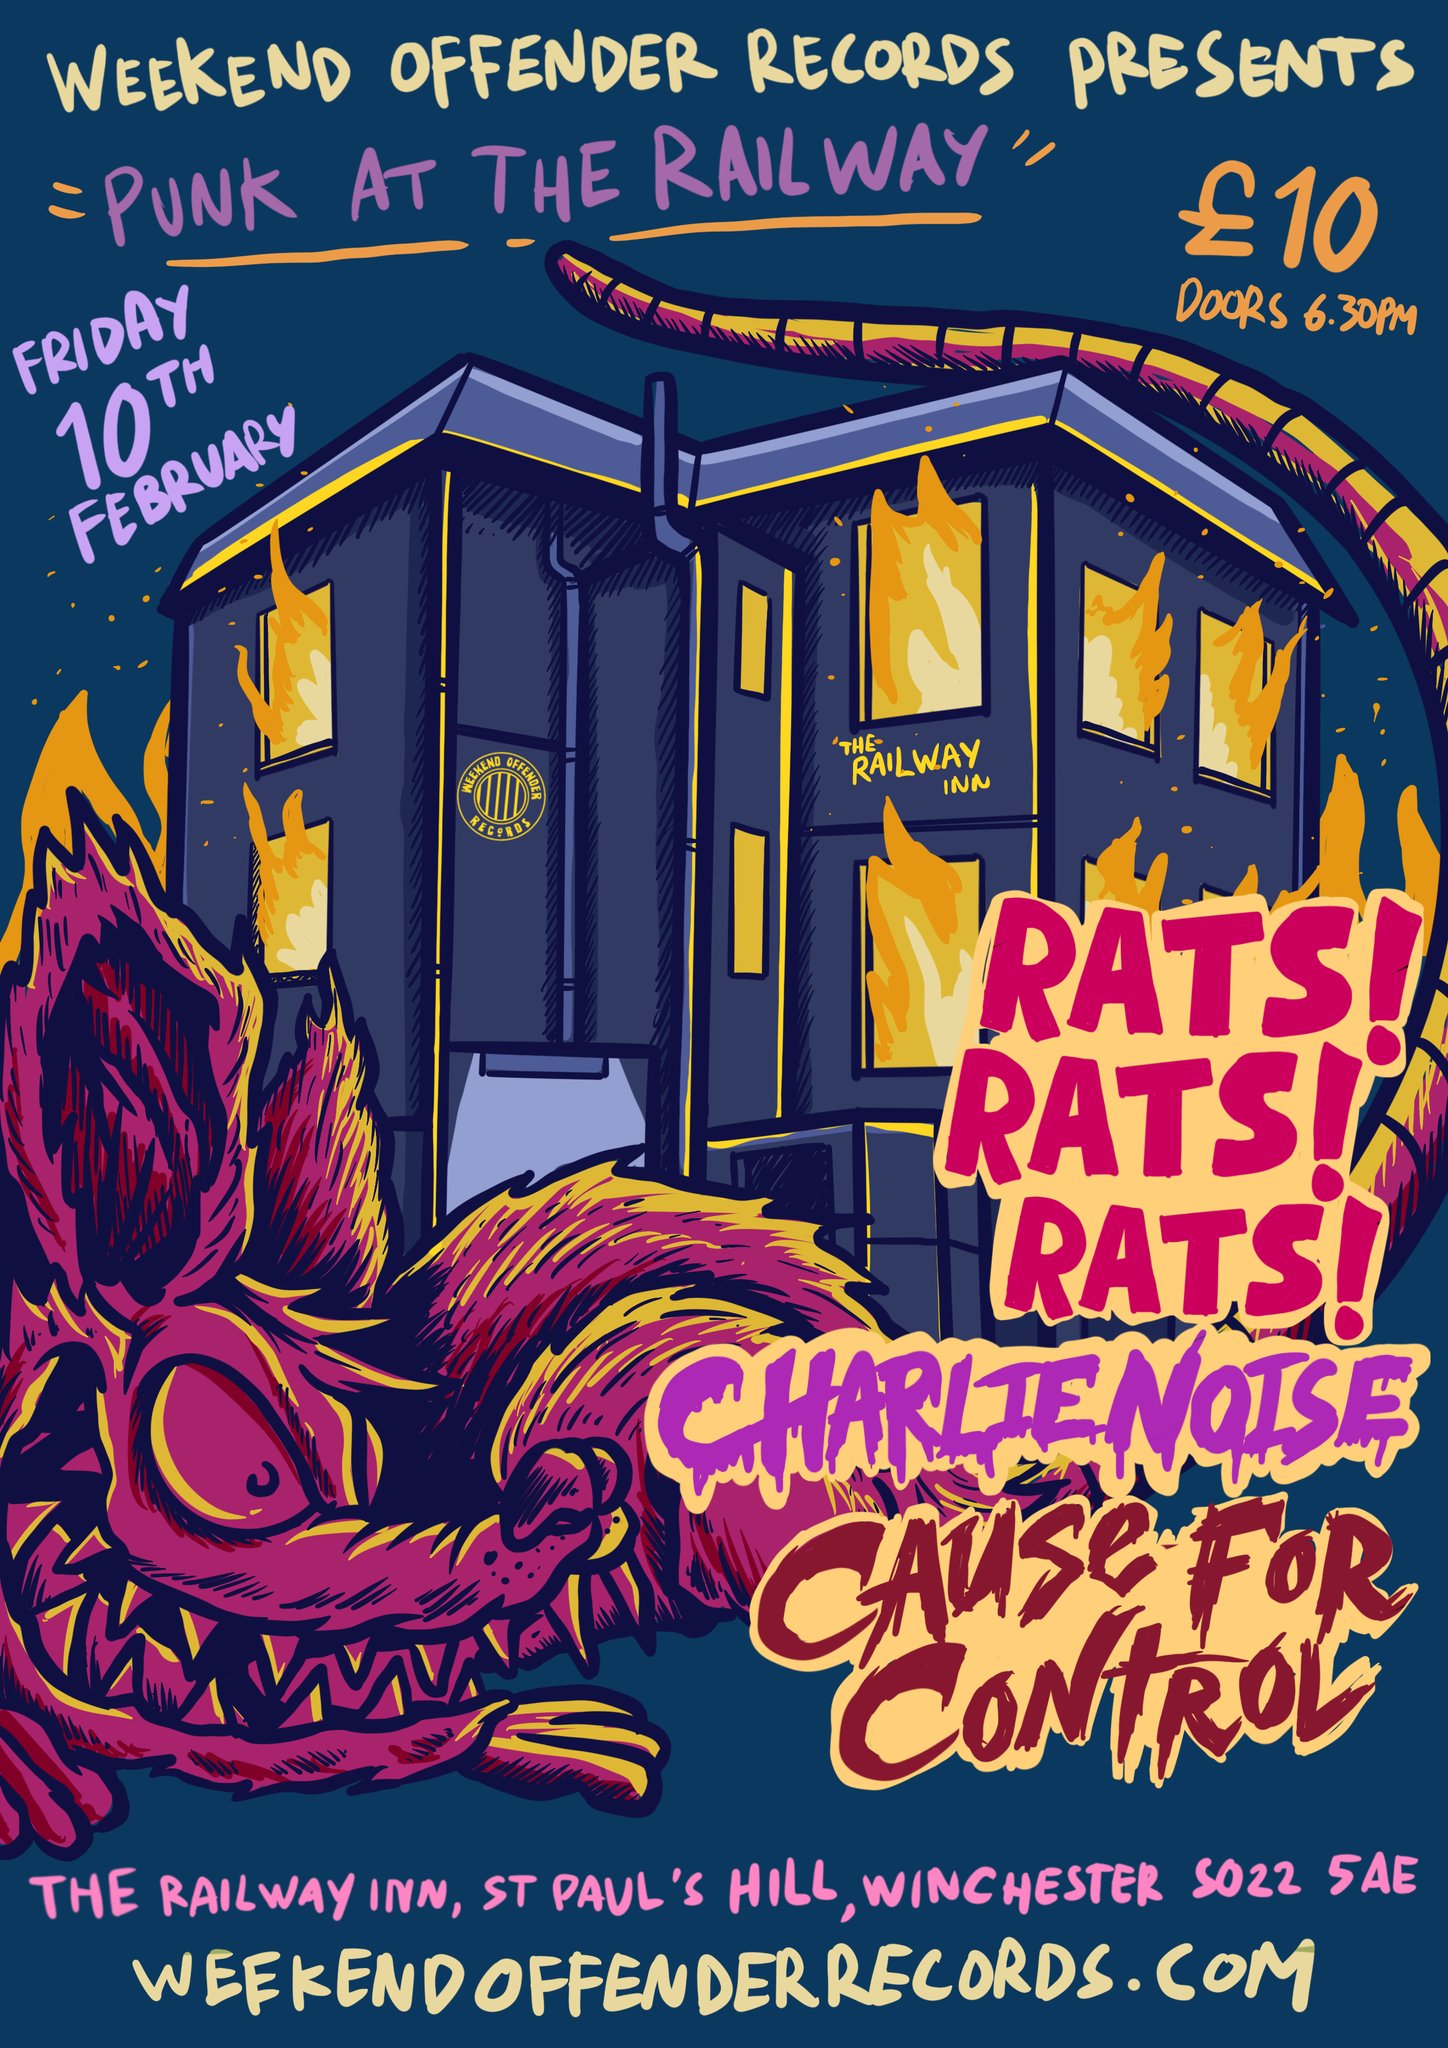 Punk at The Railway with CHARLIENOISE + Rats! Rats! Rats! + Cause For Control